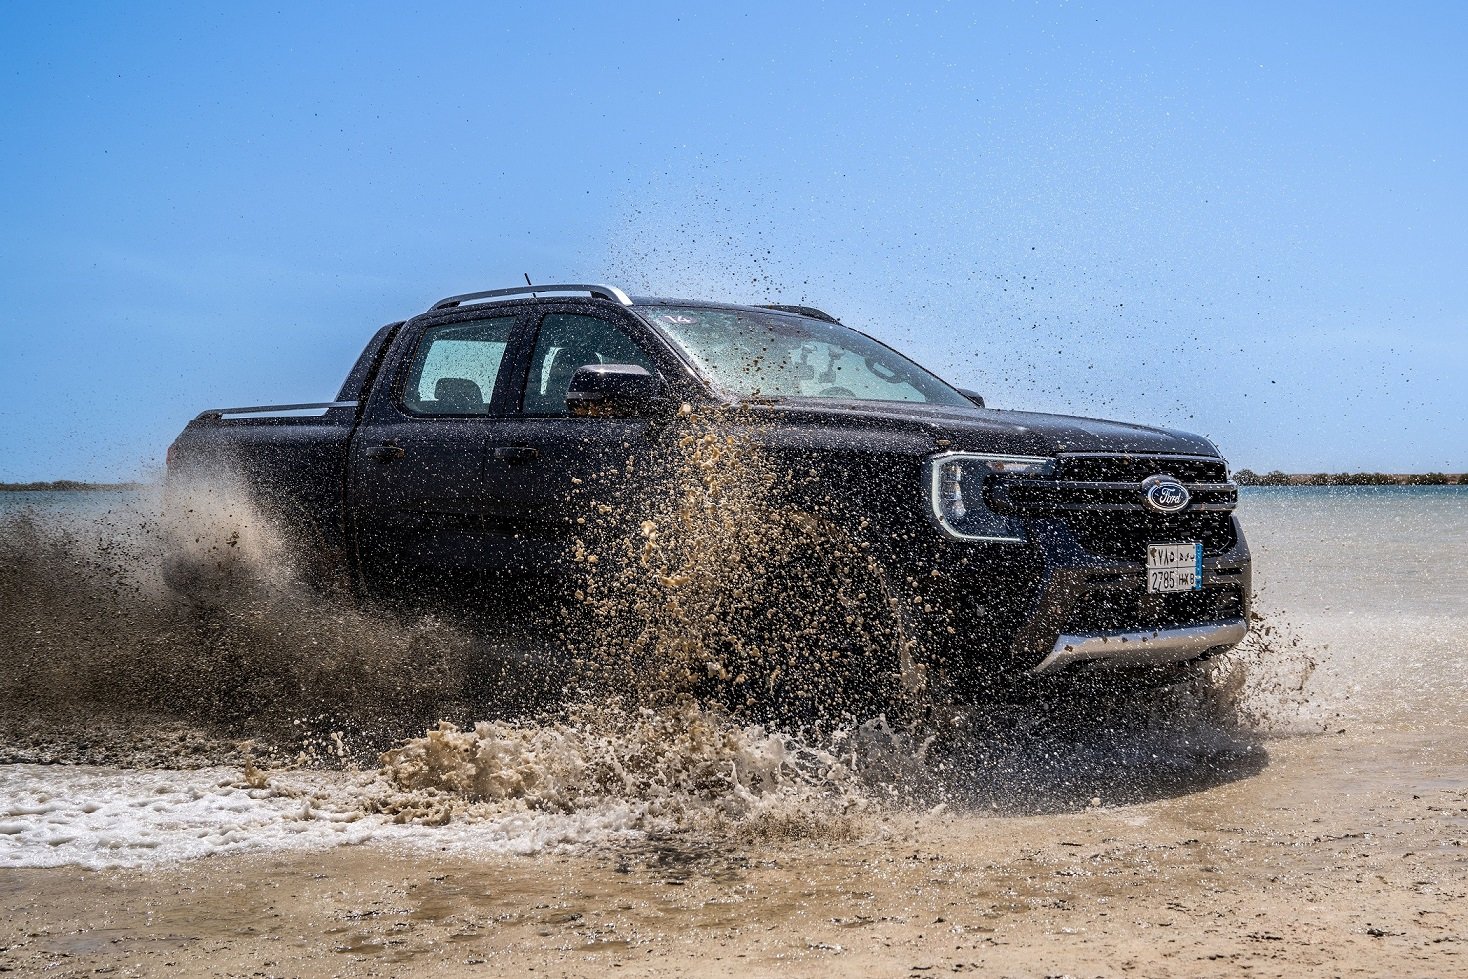 Next-Gen Ford Ranger Wildtrak Takes Power, On- And Off-Road Capabilities To The Next Level